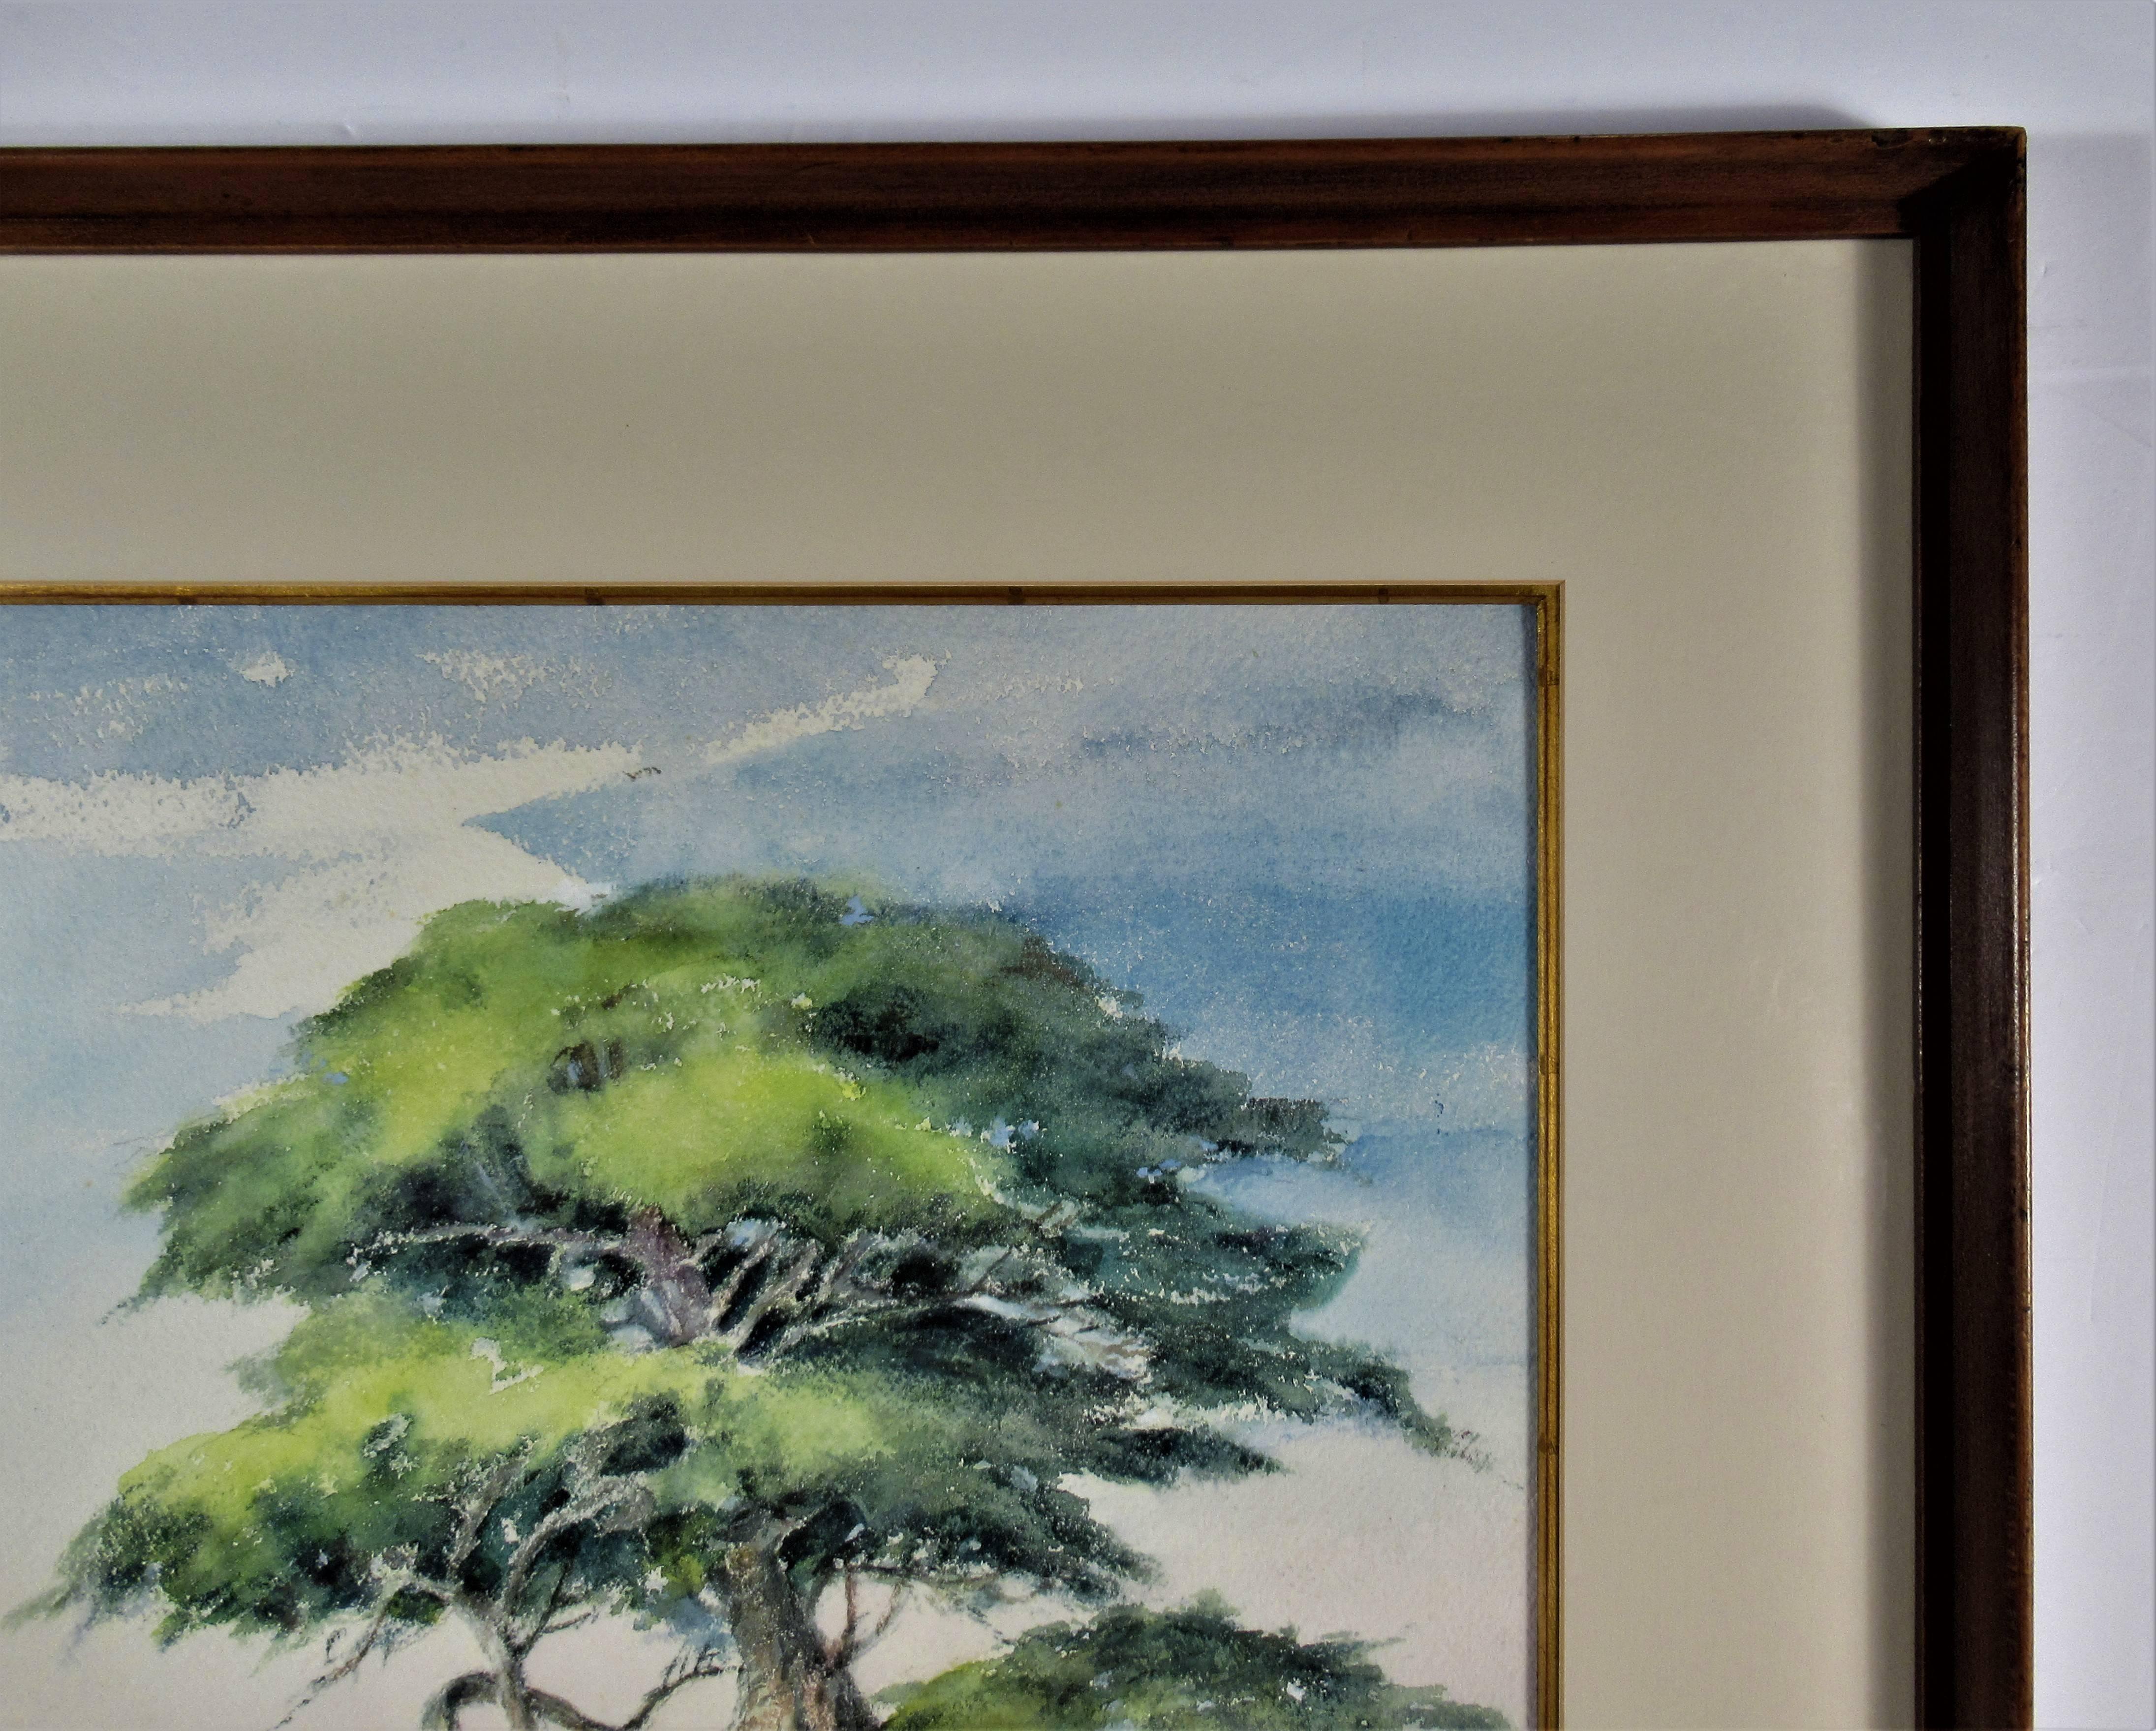 This artwork c.1950 is a watercolor by noted Oregon artist Maude Walling Wanker ( American, 1882-1970) It is signed at the lower right corner by the artist. The artwork size is 16.25 x 21.25 inches, framed size is 25 x 29 inches. Framed in a dark